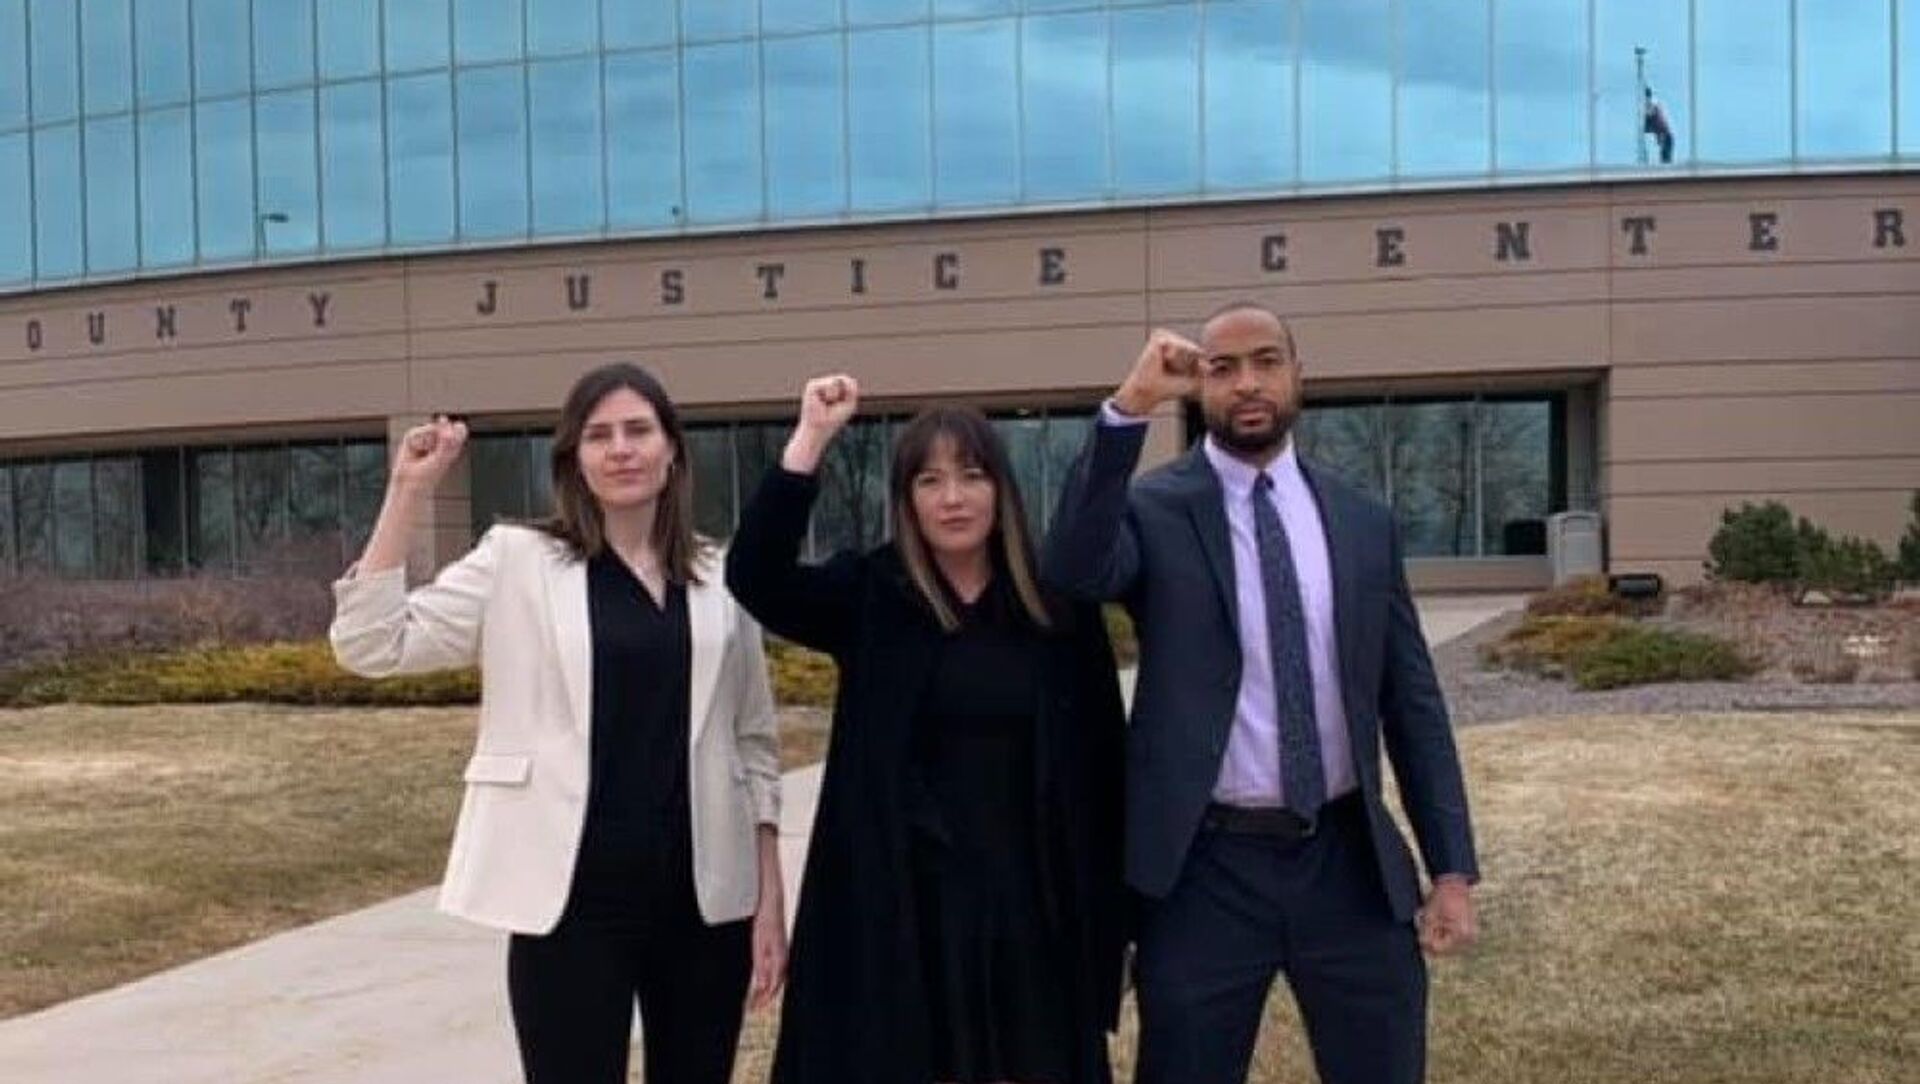 Activists Lillian House, Joel Northam and Eliza Lucero head to a pretrial hearing in Aurora, Colorado, for charges stemming from a July 2020 Black Lives Matter protest - Sputnik International, 1920, 06.05.2021